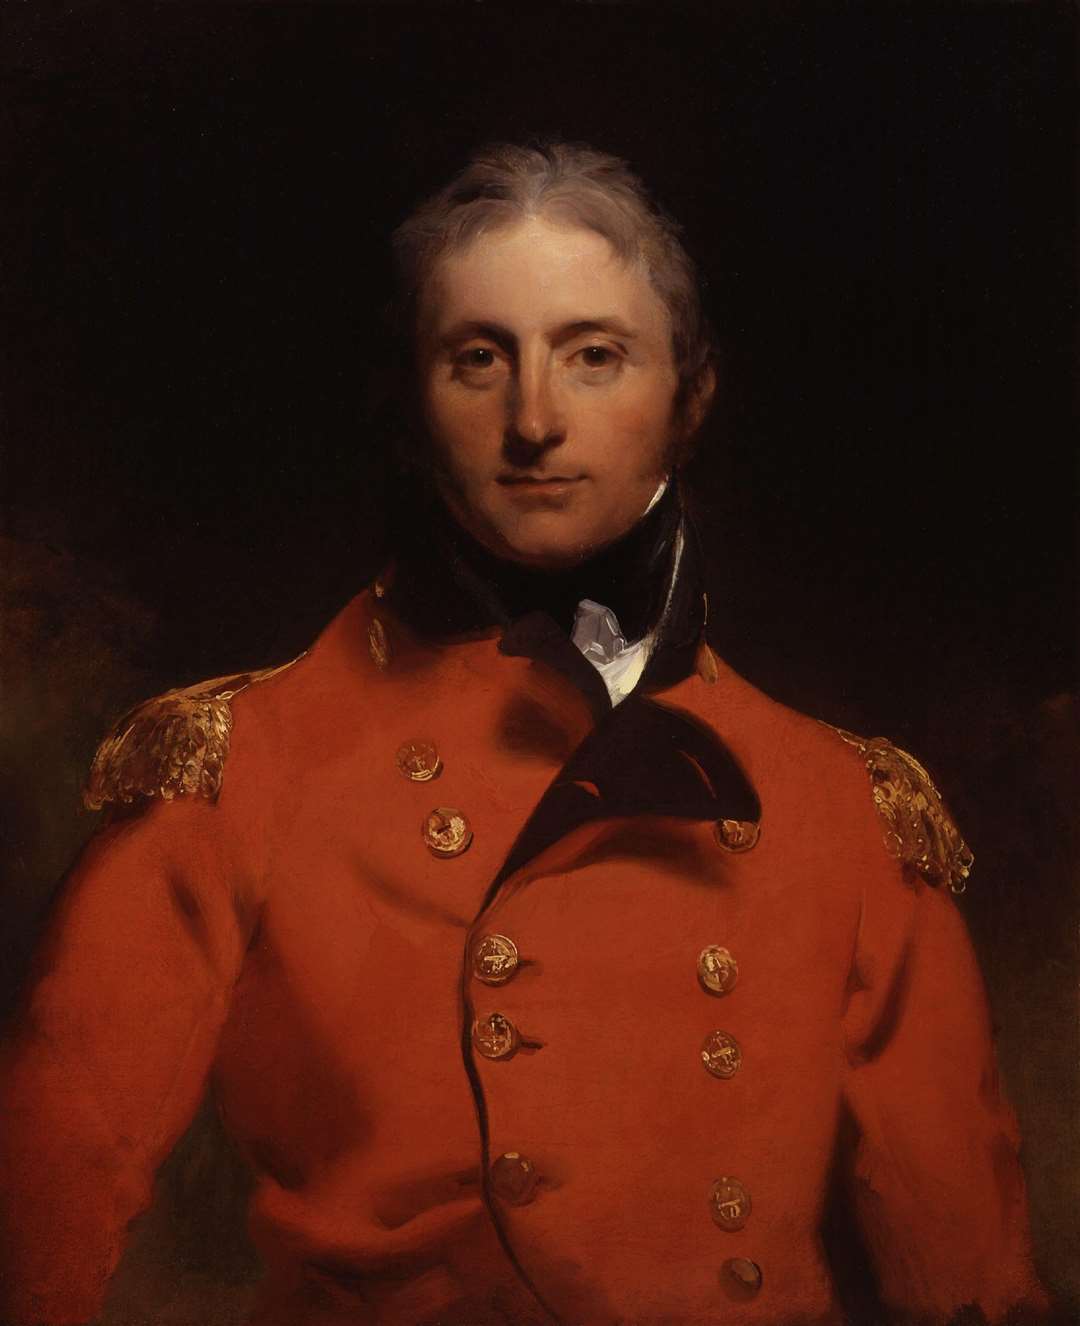 Sir John Moore trained troops at Shorncliffe Garrison to fight Napoleon